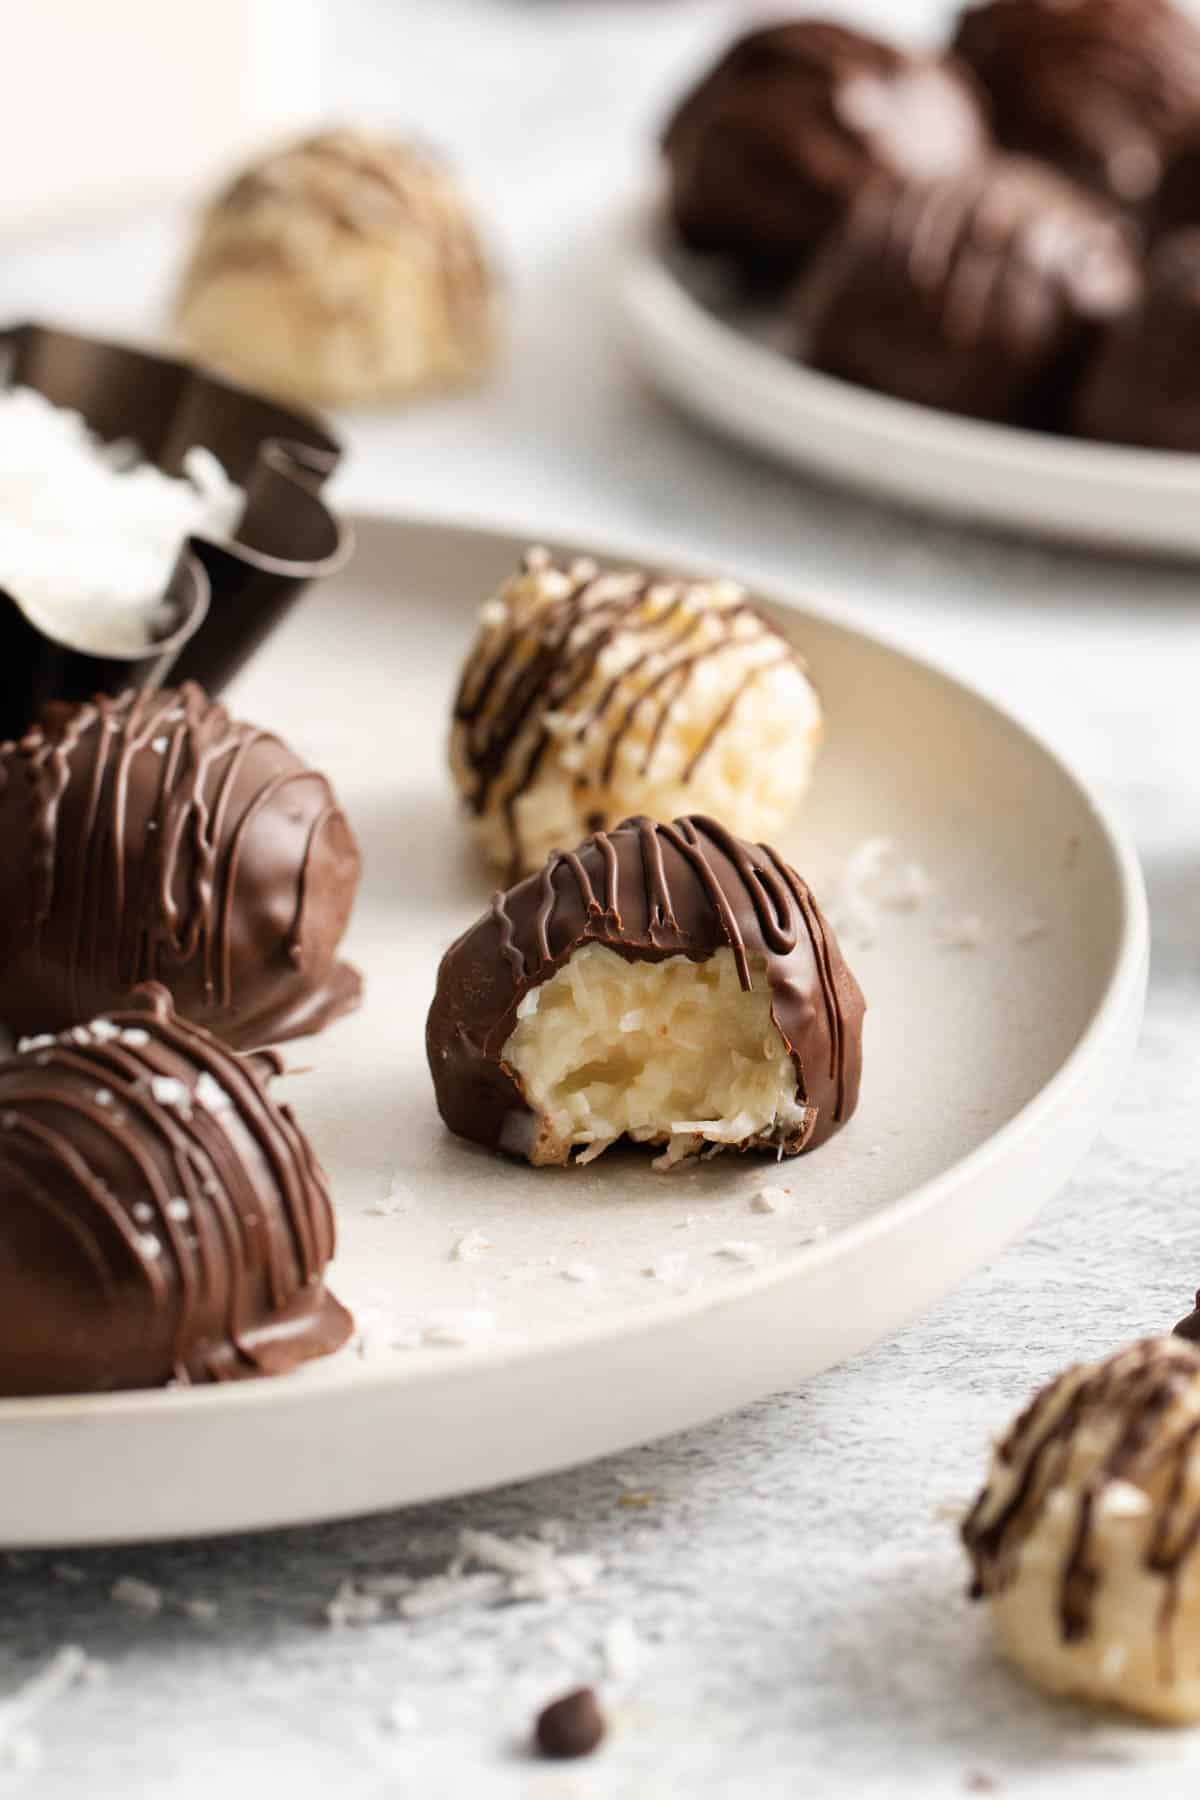 An image of Mounds Truffles (aka chocolate coconut balls) on a plate with a bite taken out of one of them.